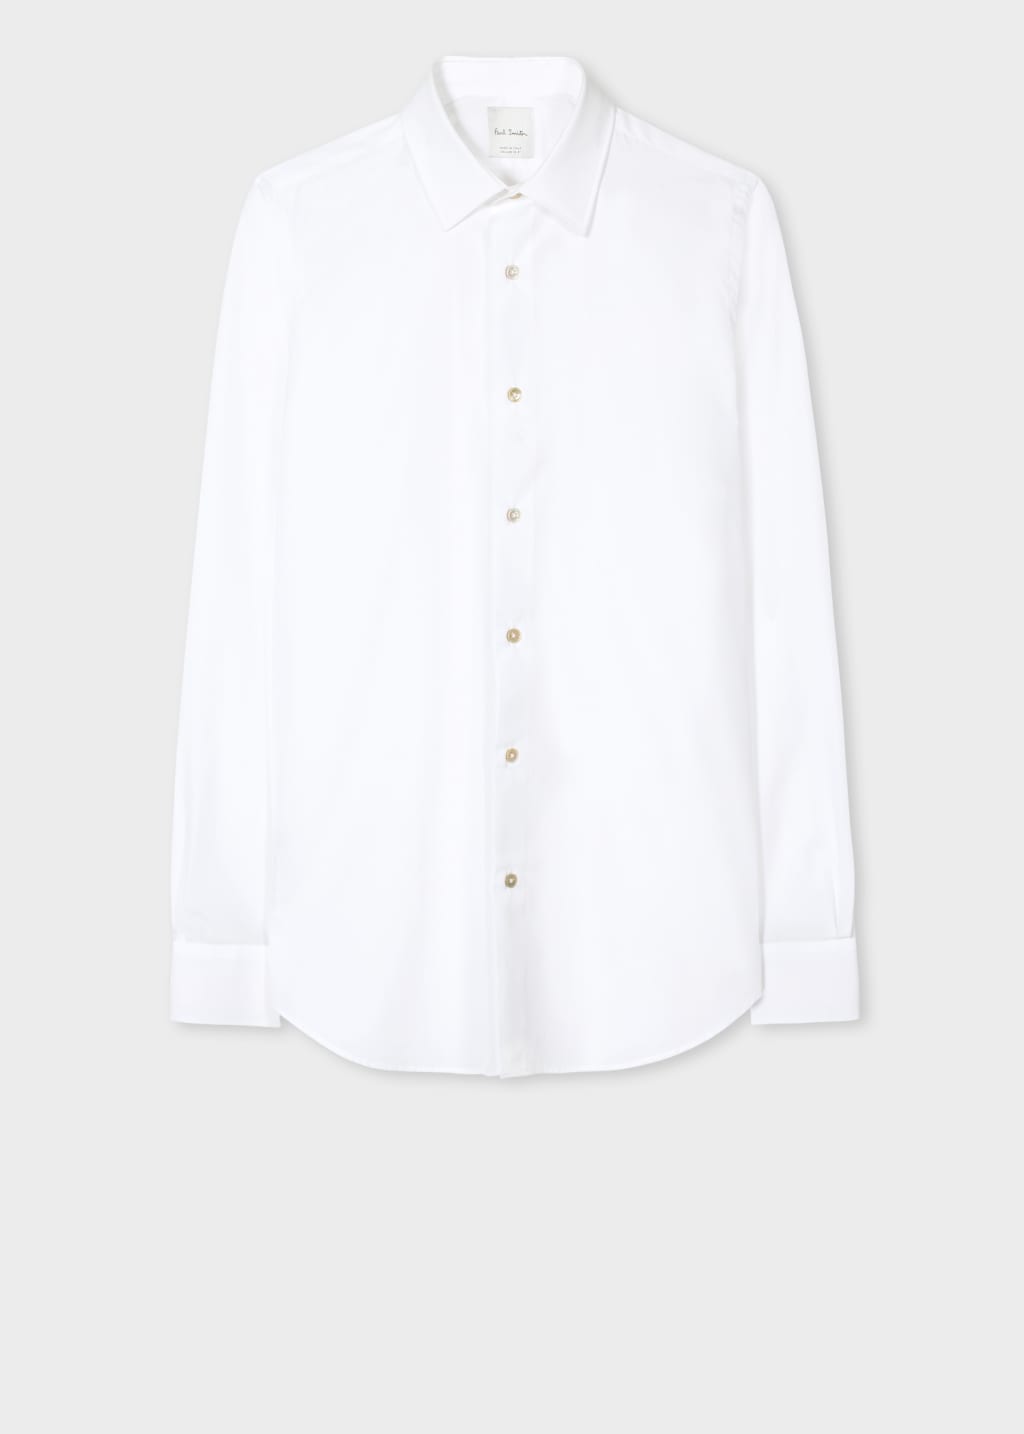 Front View - Tailored-Fit White Cotton 'Signature Stripe' Cuff Shirt Paul Smith